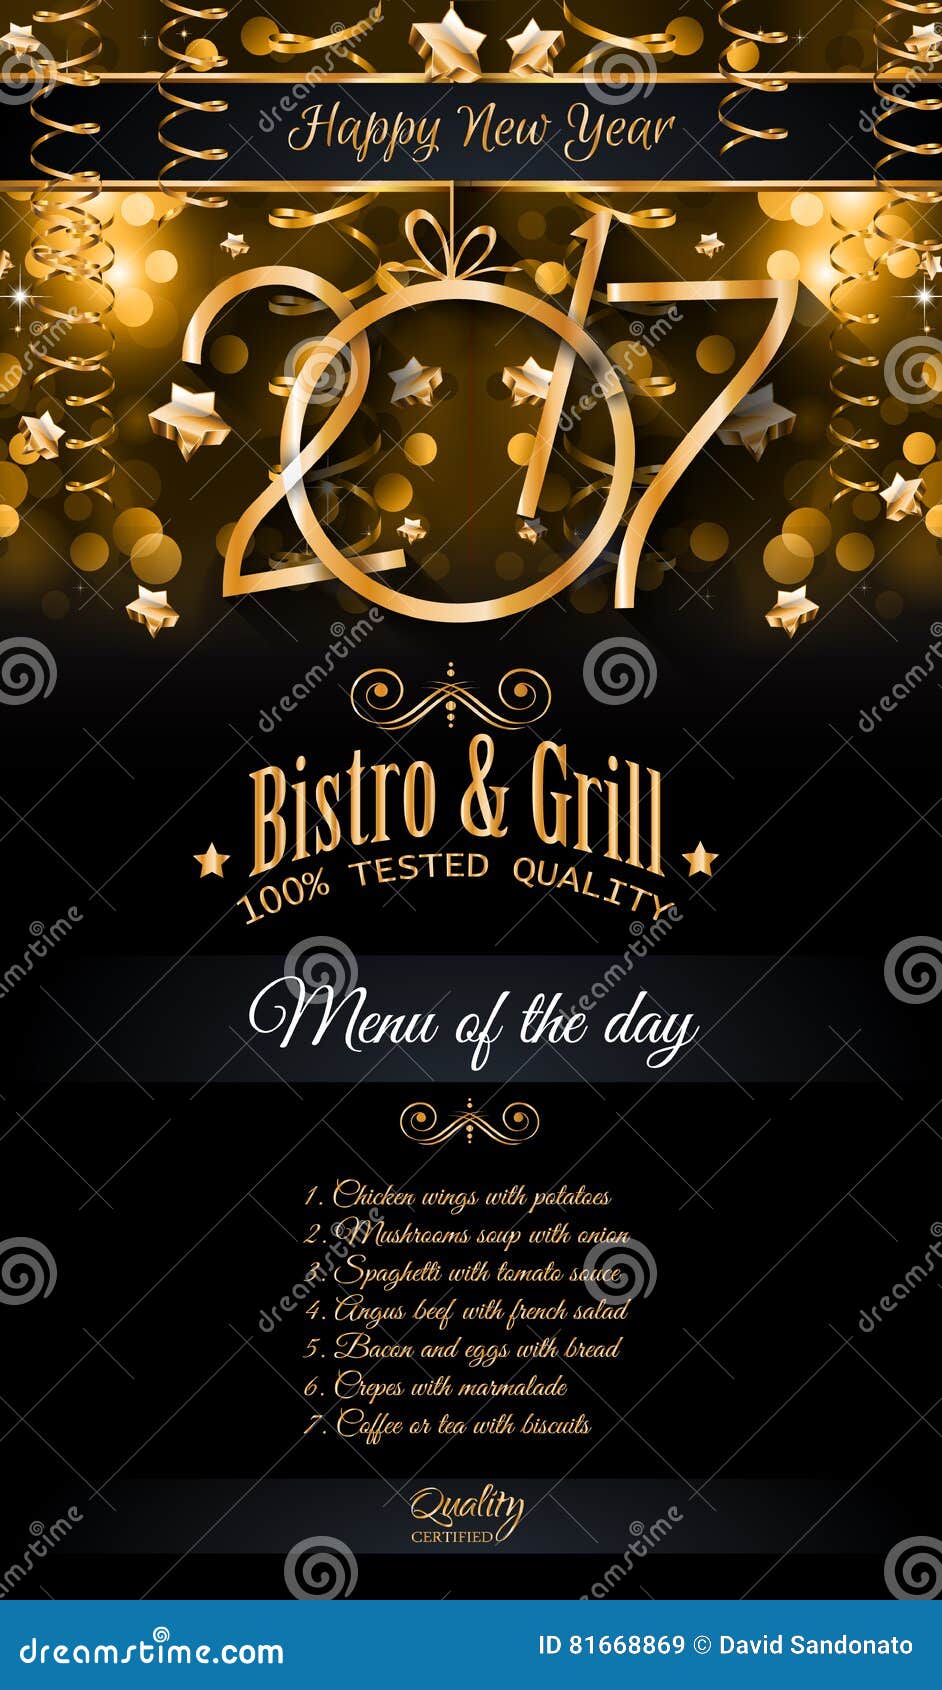 21 Happy New Year Restaurant Menu Template for Your Seasonal Within New Years Eve Menu Template